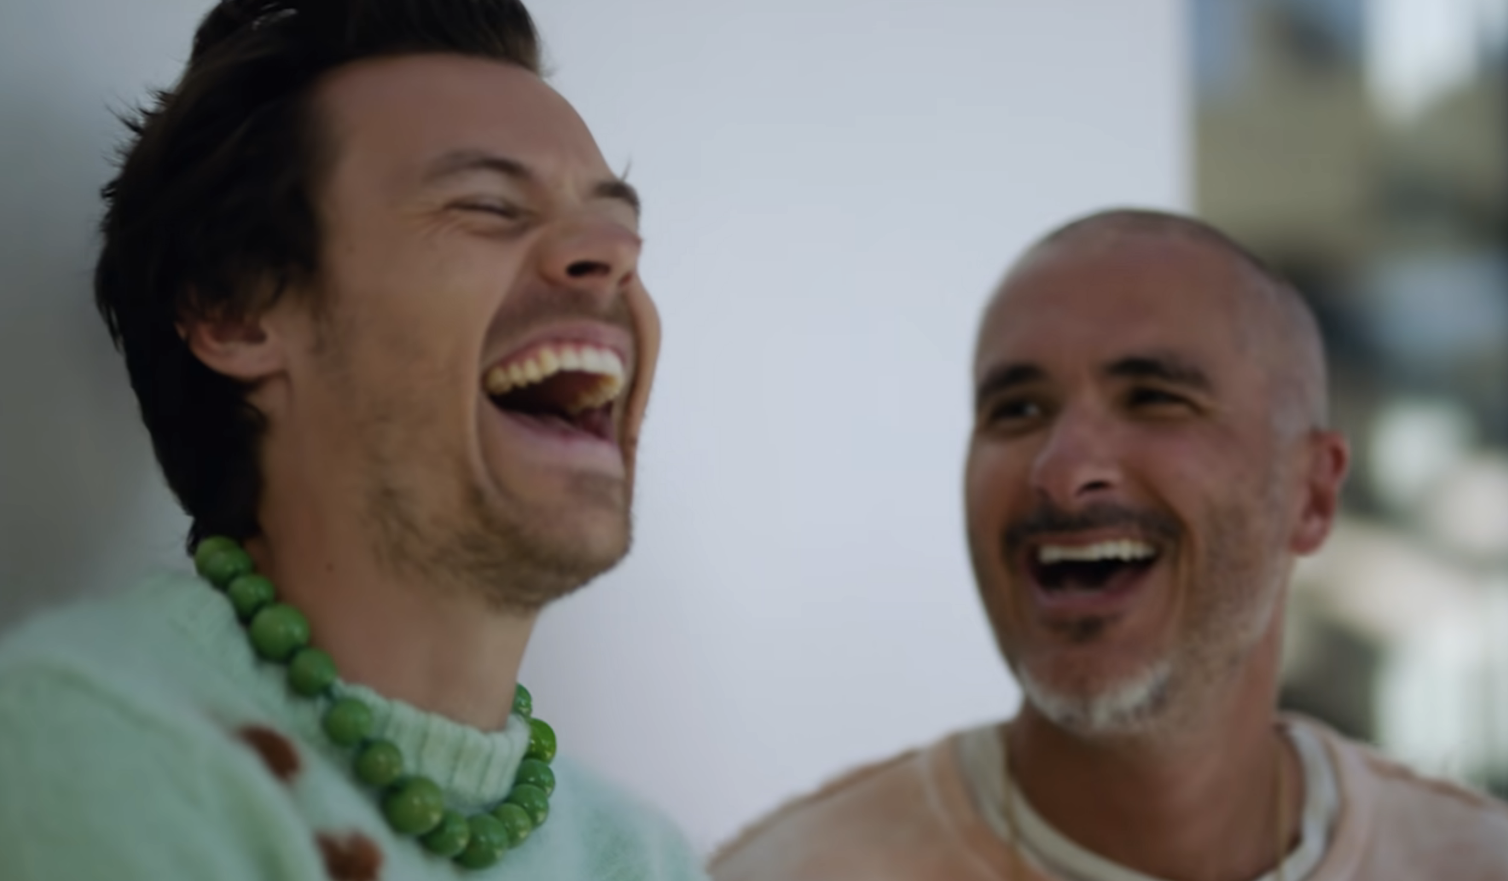 Styles laughing with Zane Lowe